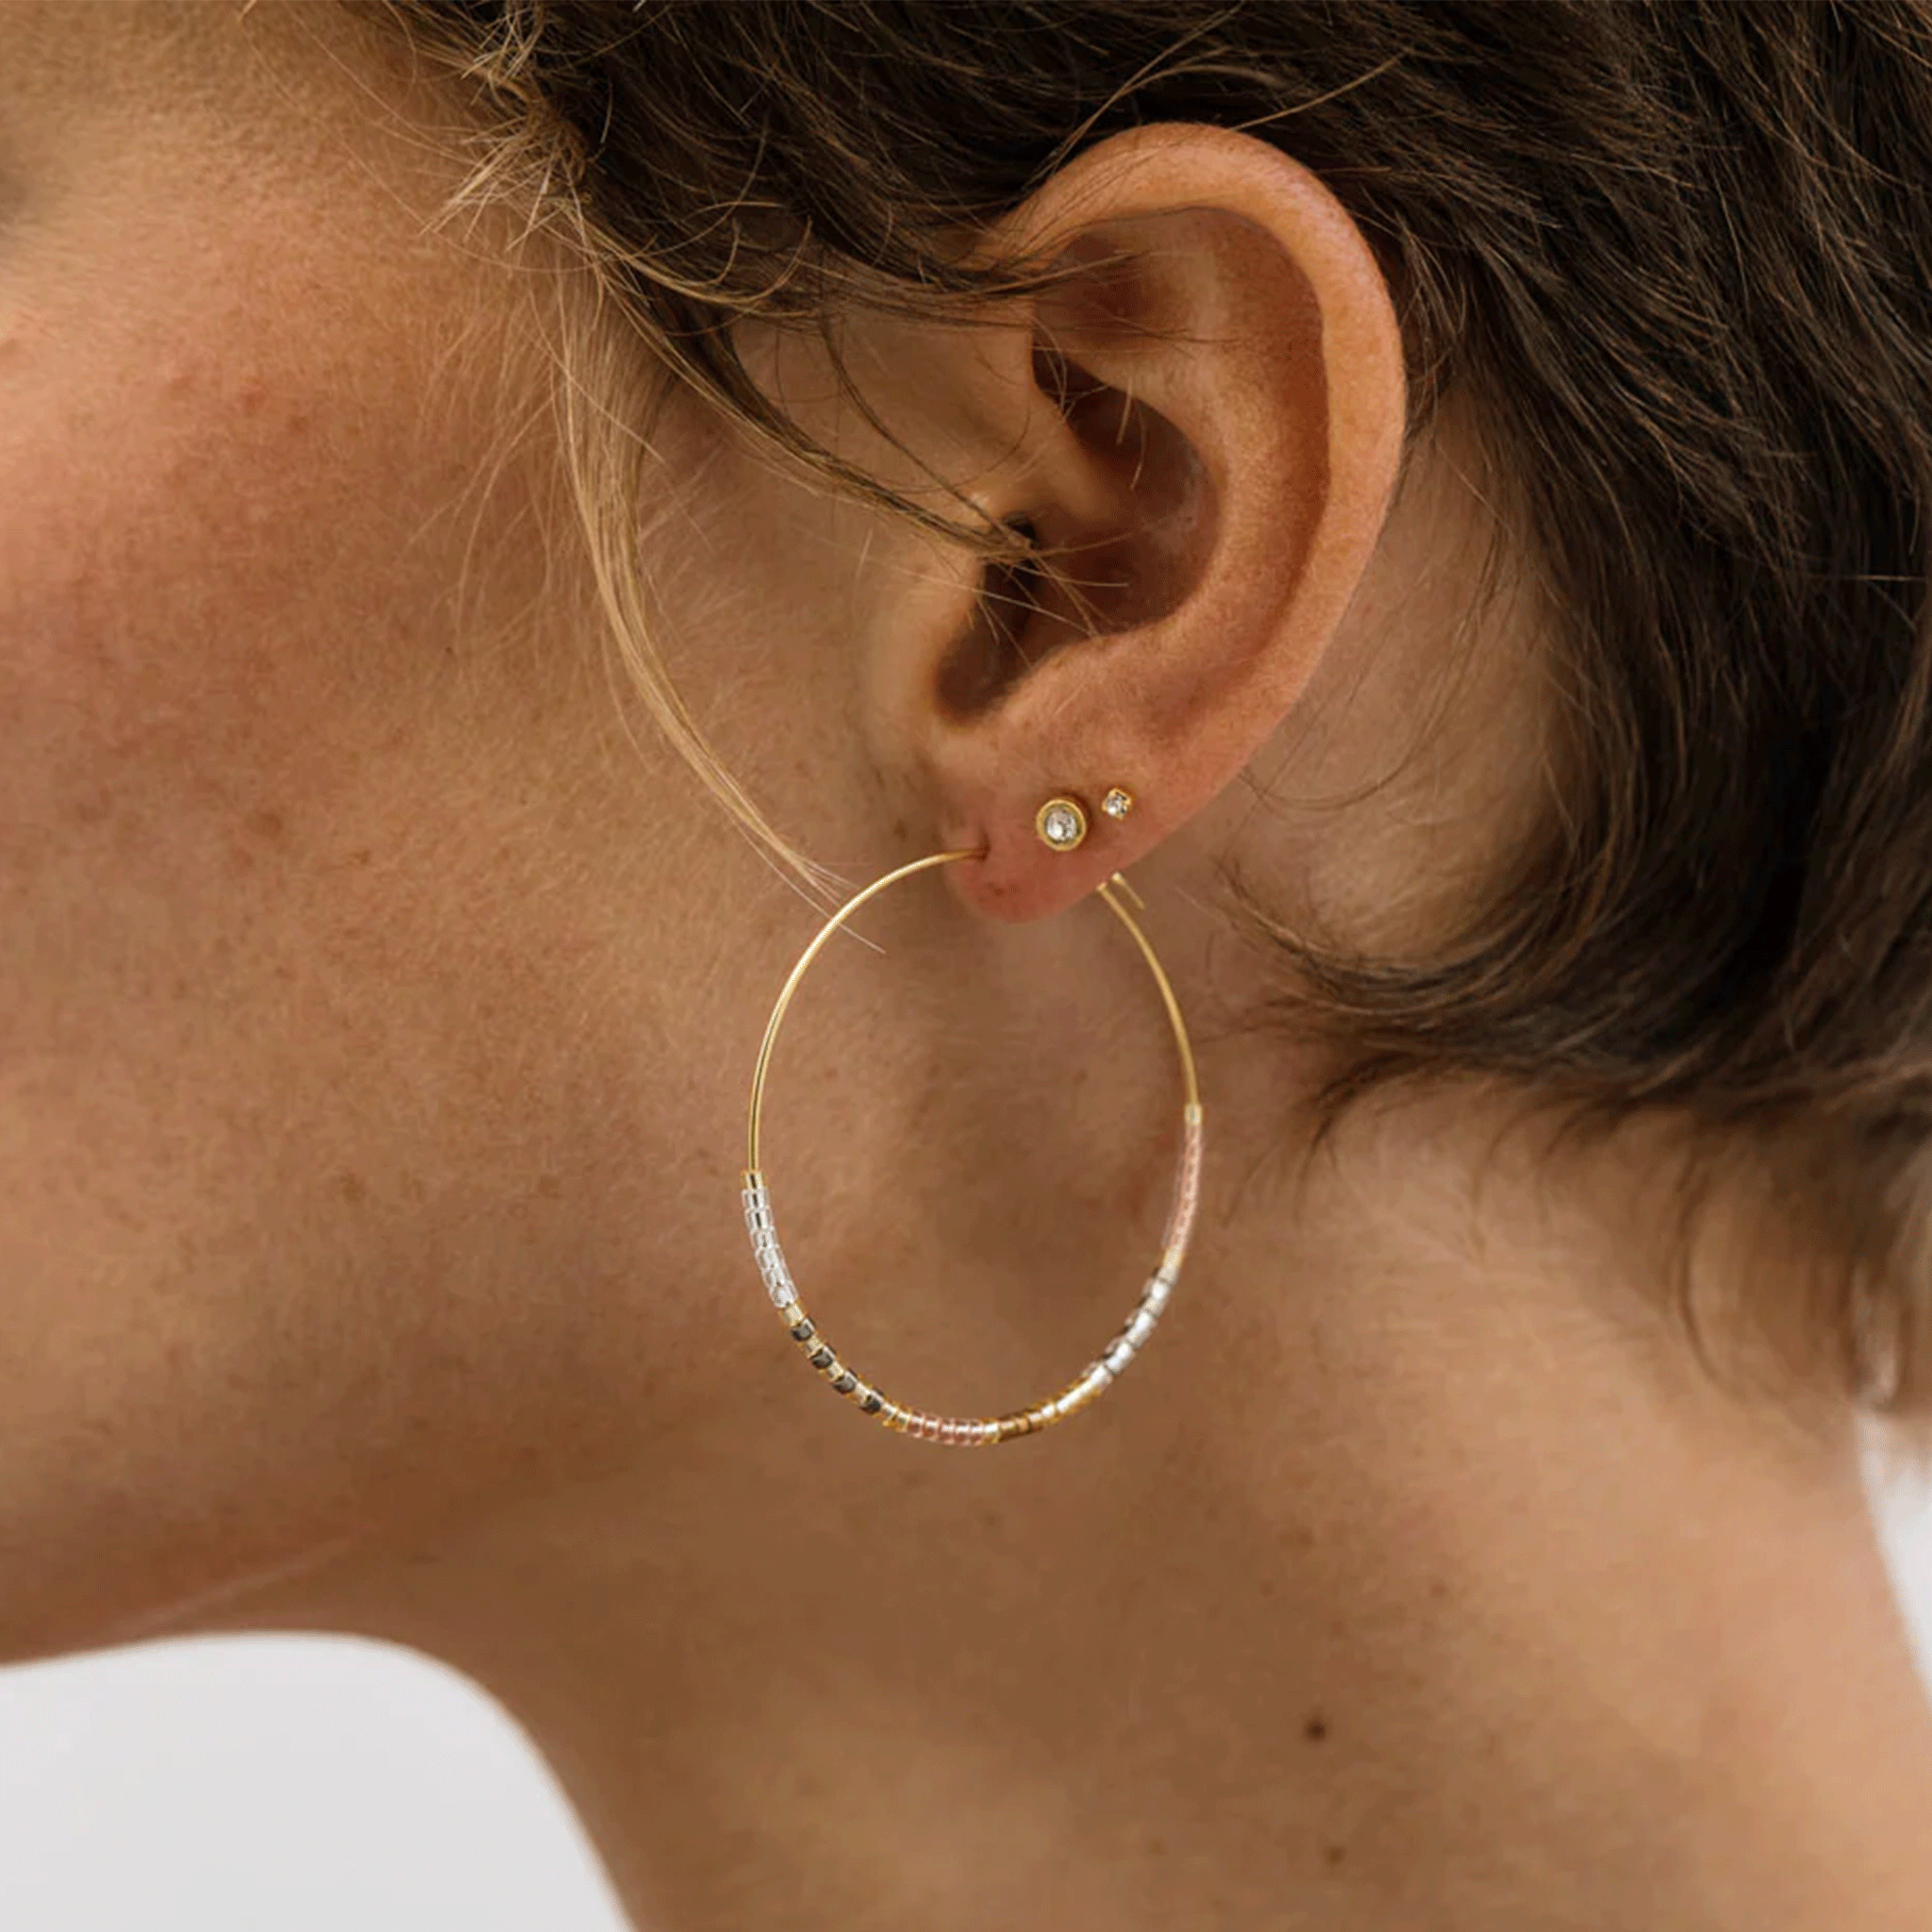 A model wearing a pair of gold thin hoop earrings with neutral colored beads on the bottom half of it. '